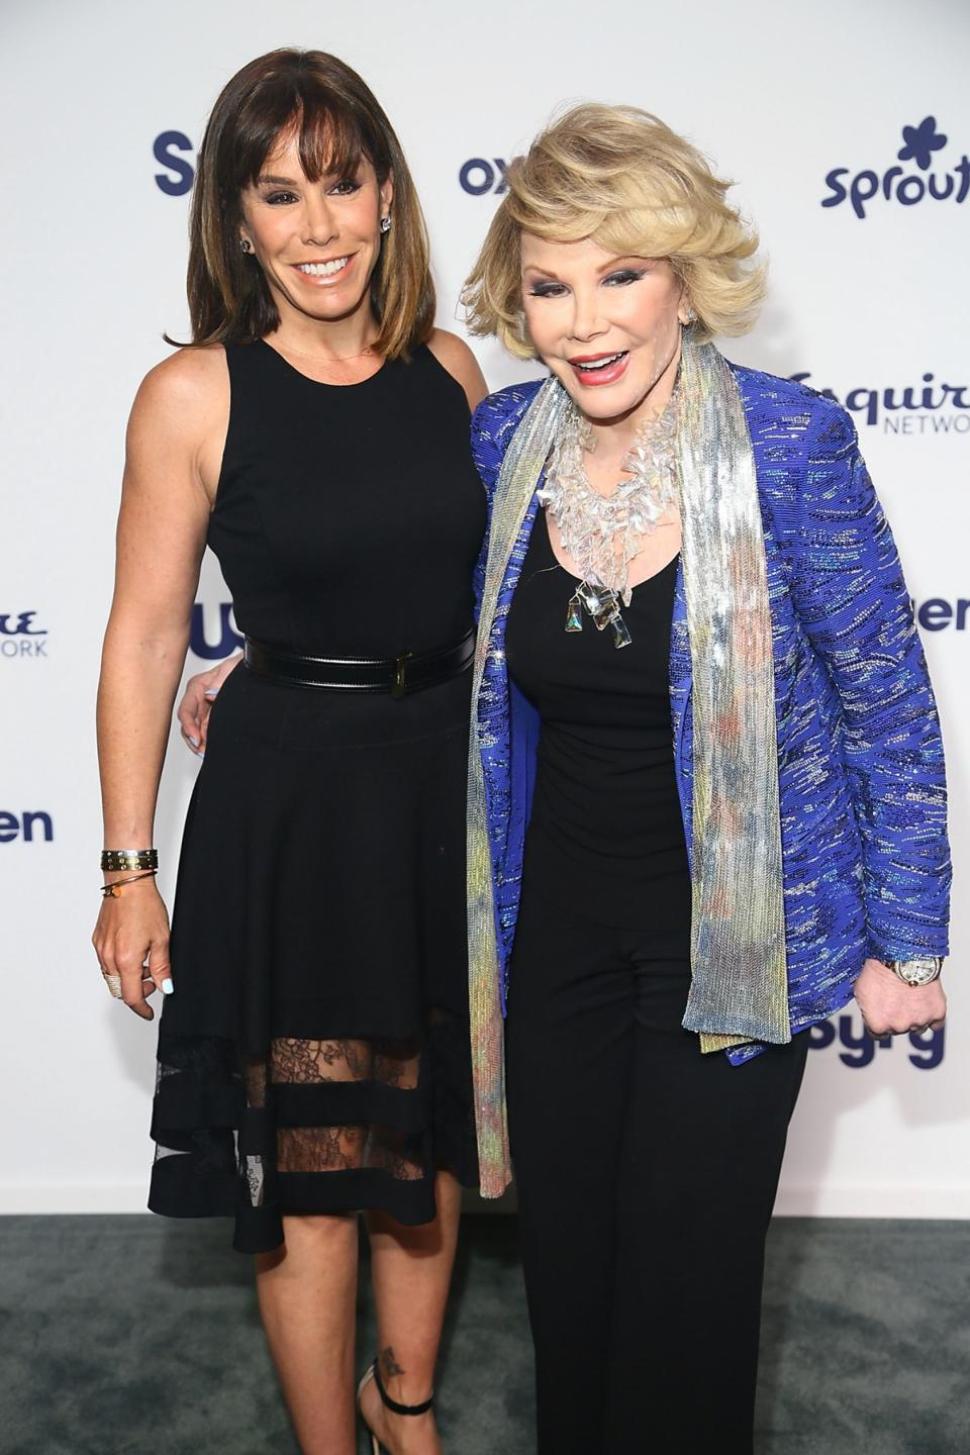 Melissa Rivers is moving forward with a lawsuit after the death of her mother, comedian Joan Rivers.